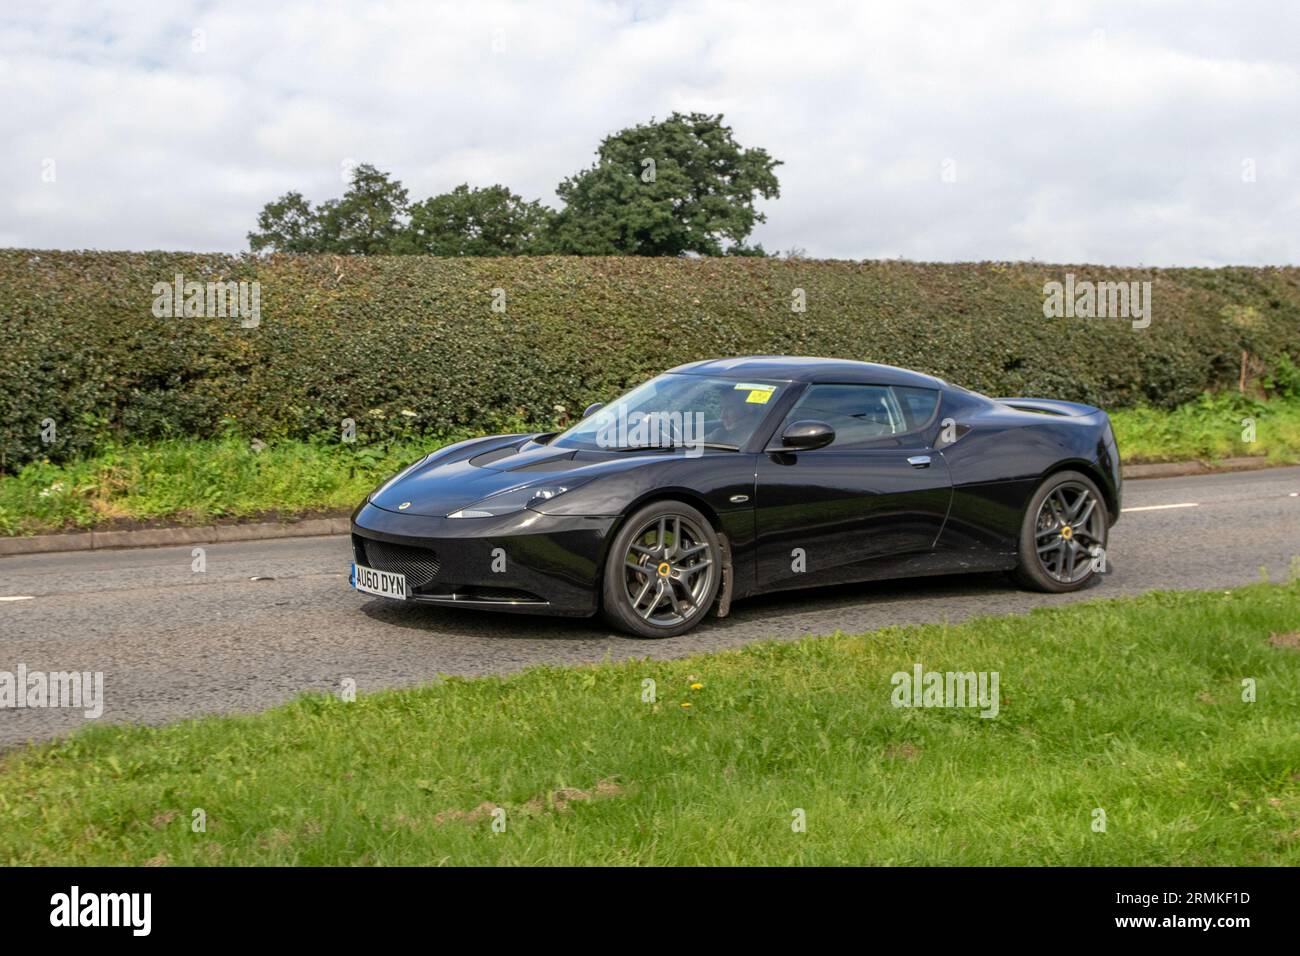 2010 Lotus Evora 4 V6 Black Car Coupe Petrol 3456 cc, supercharged and intercooled DOHC 24-valve V-6,  equipped with a mid-mounted, transverse, Toyota-sourced 3.5-litre 24-valve 2GR V6 engine. Stock Photo